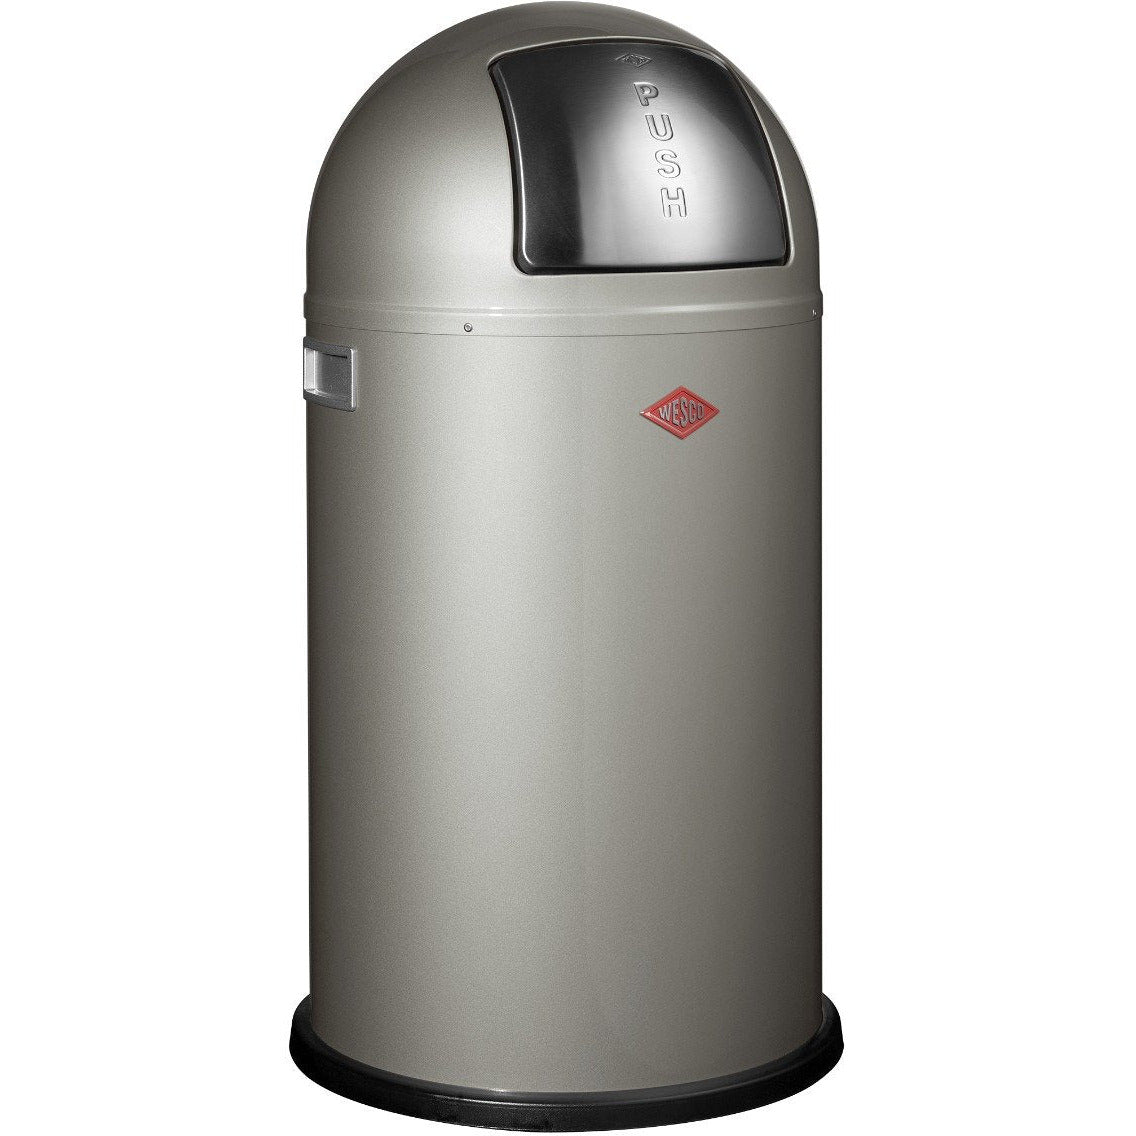 Wesco Pushboy Single Compartment 50 Litre Kitchen Bin in New Silver: 175831-03